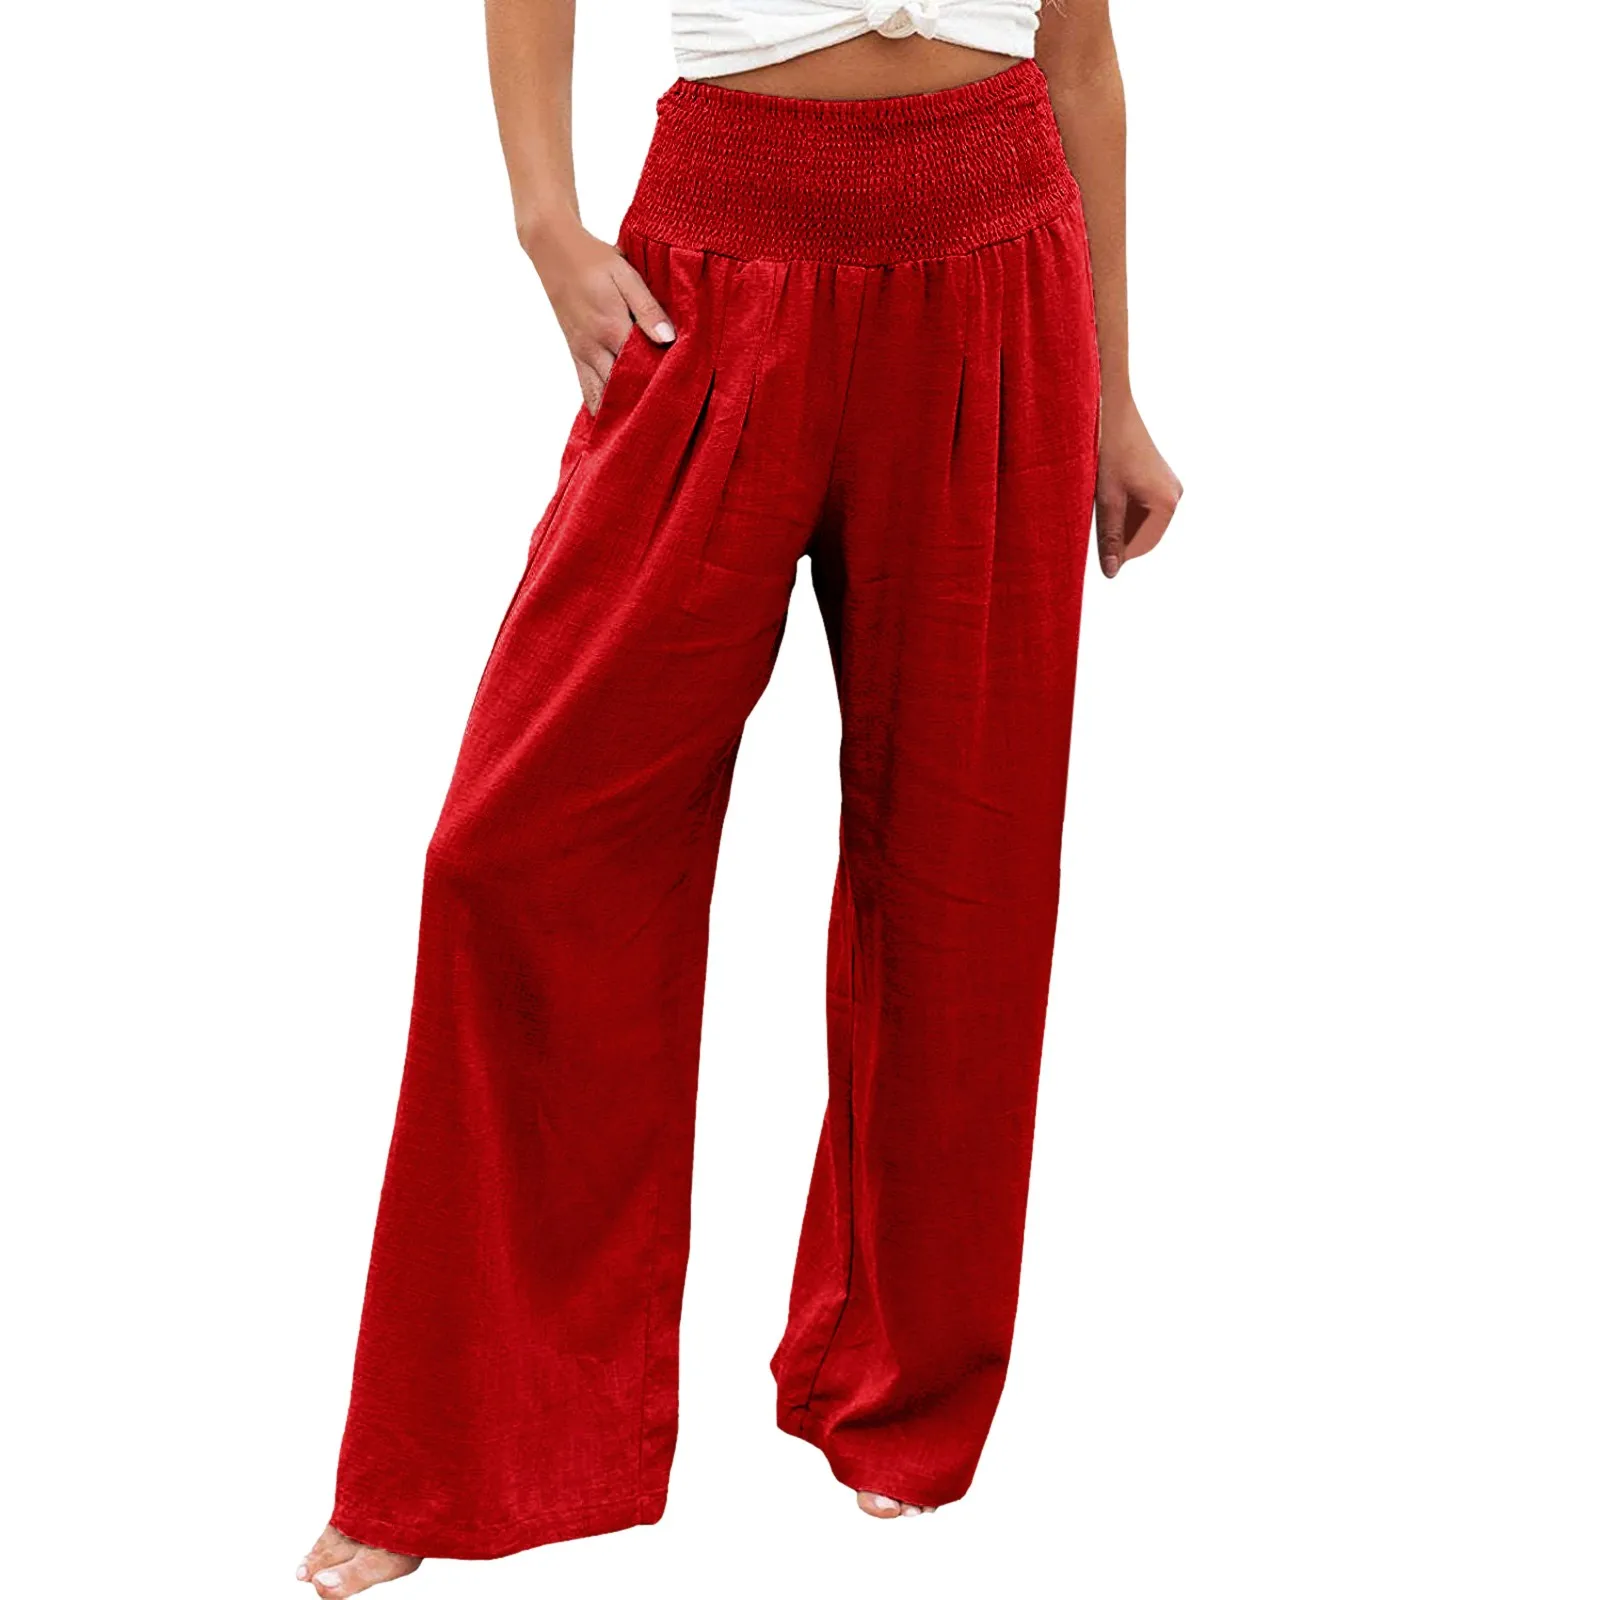 Casual Linen Pants for Women Office Lady Business Work High Waisted Wide Leg Trousers with Pockets Plus Size Elastic Waist Pants